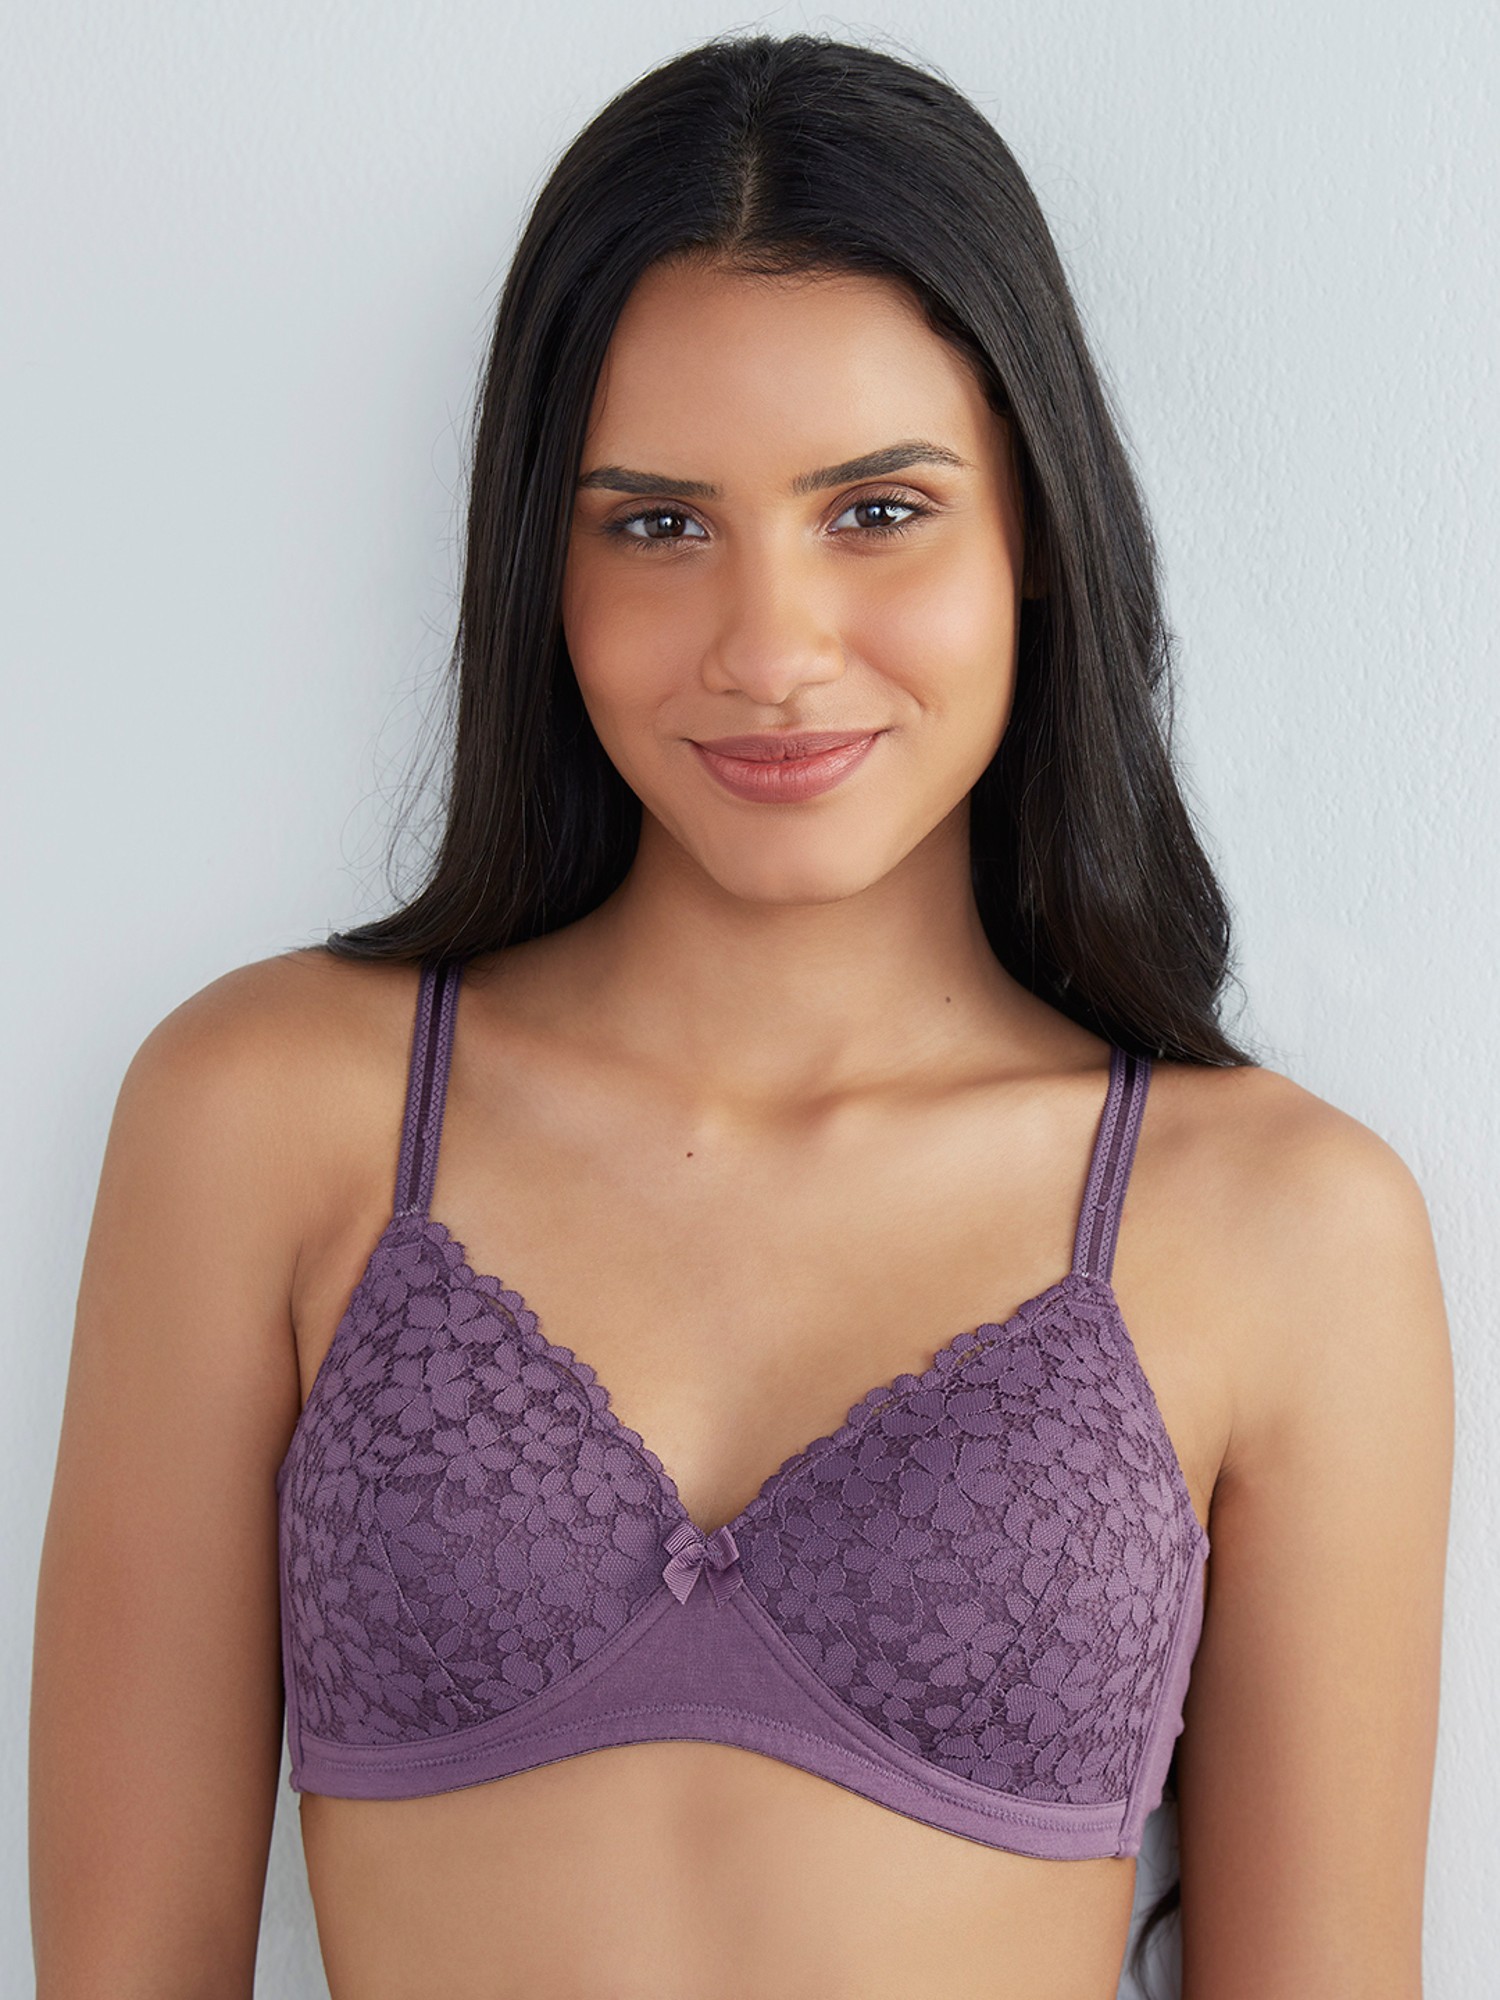 Buy BOOMBUZZ Heavy Padded Bra for Every Day Comfort with